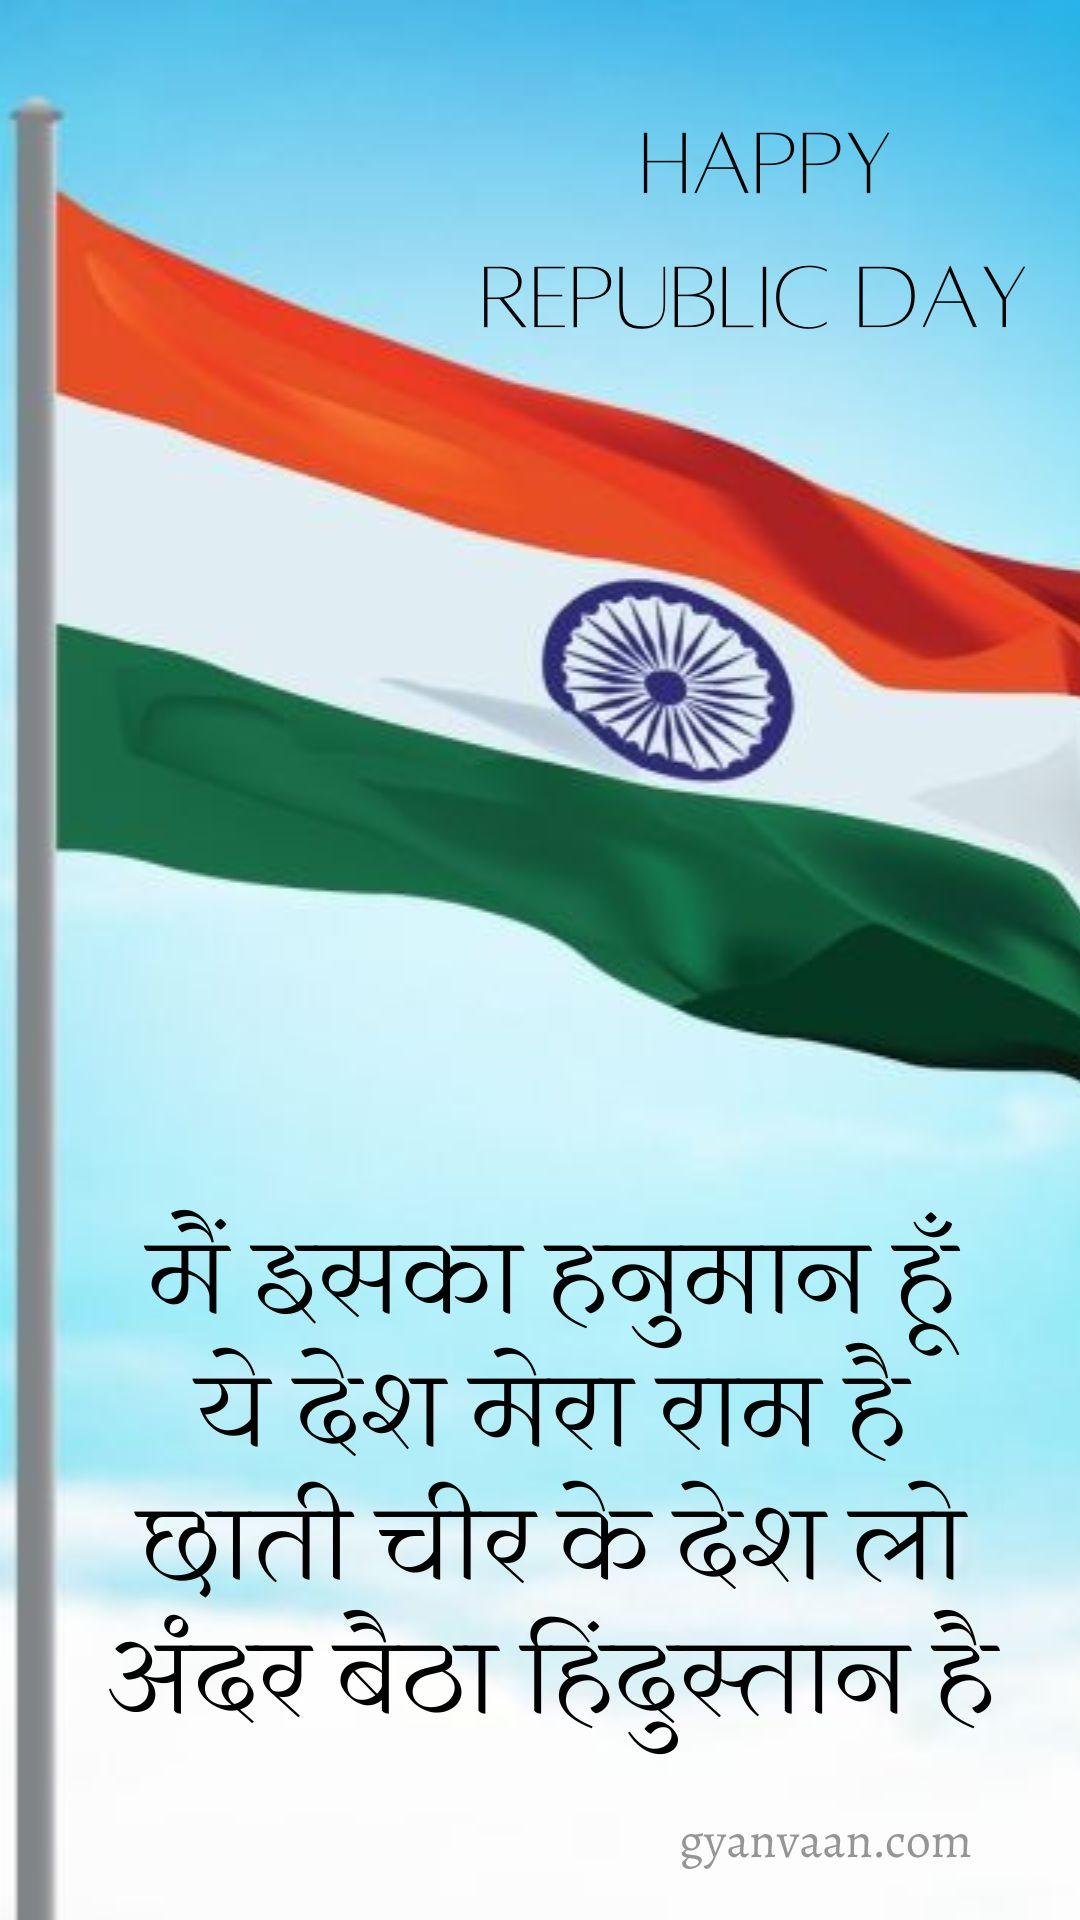 Republic Day Quotes In Hindi With Status And Shayari 1 - Republic Day Quotes In Hindi